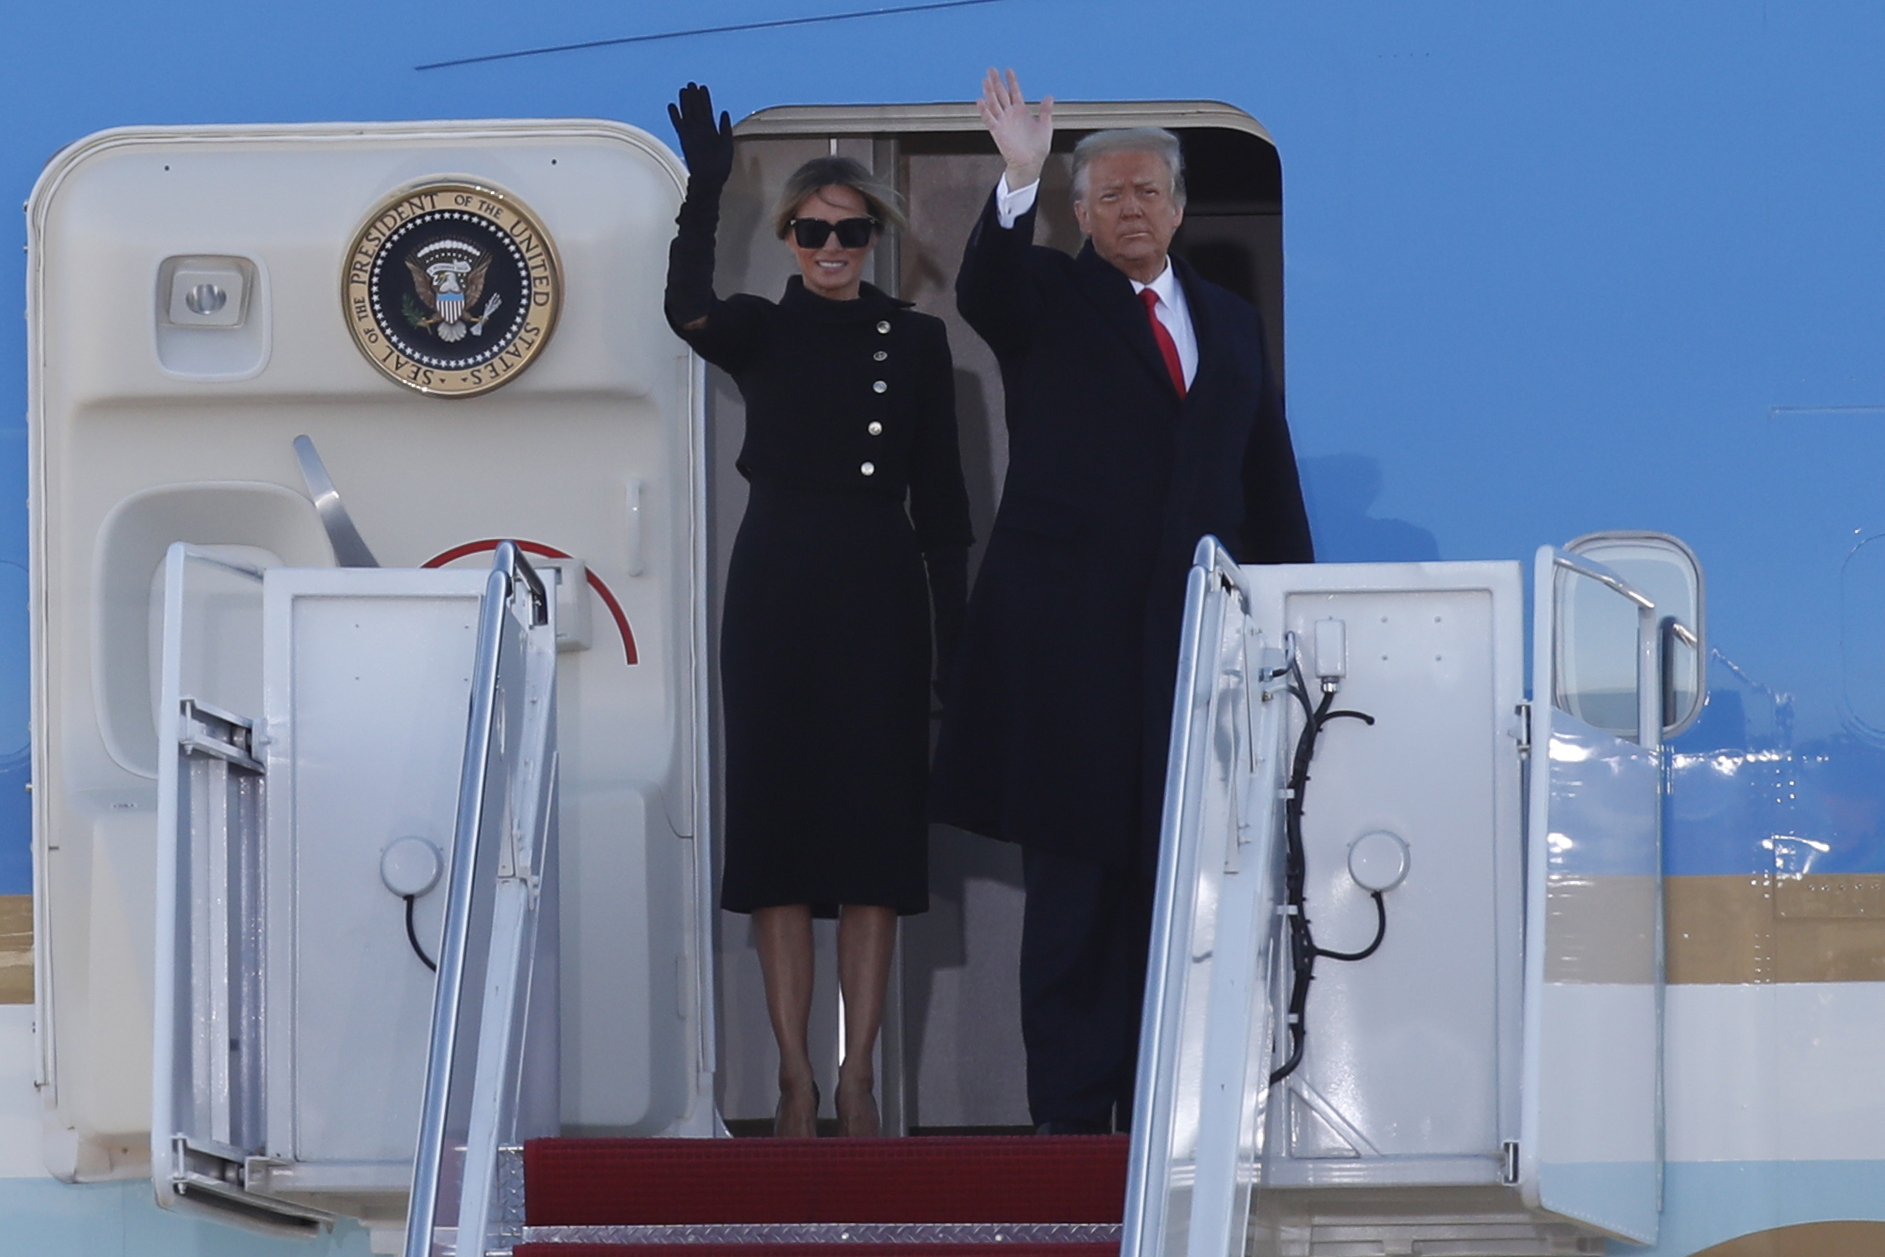 PHOTO: President Donald Trump and first lady Melania Trump wave to a crowd as they board Air Force One at Andrews Air Force Base, Md., Jan. 20, 2021.